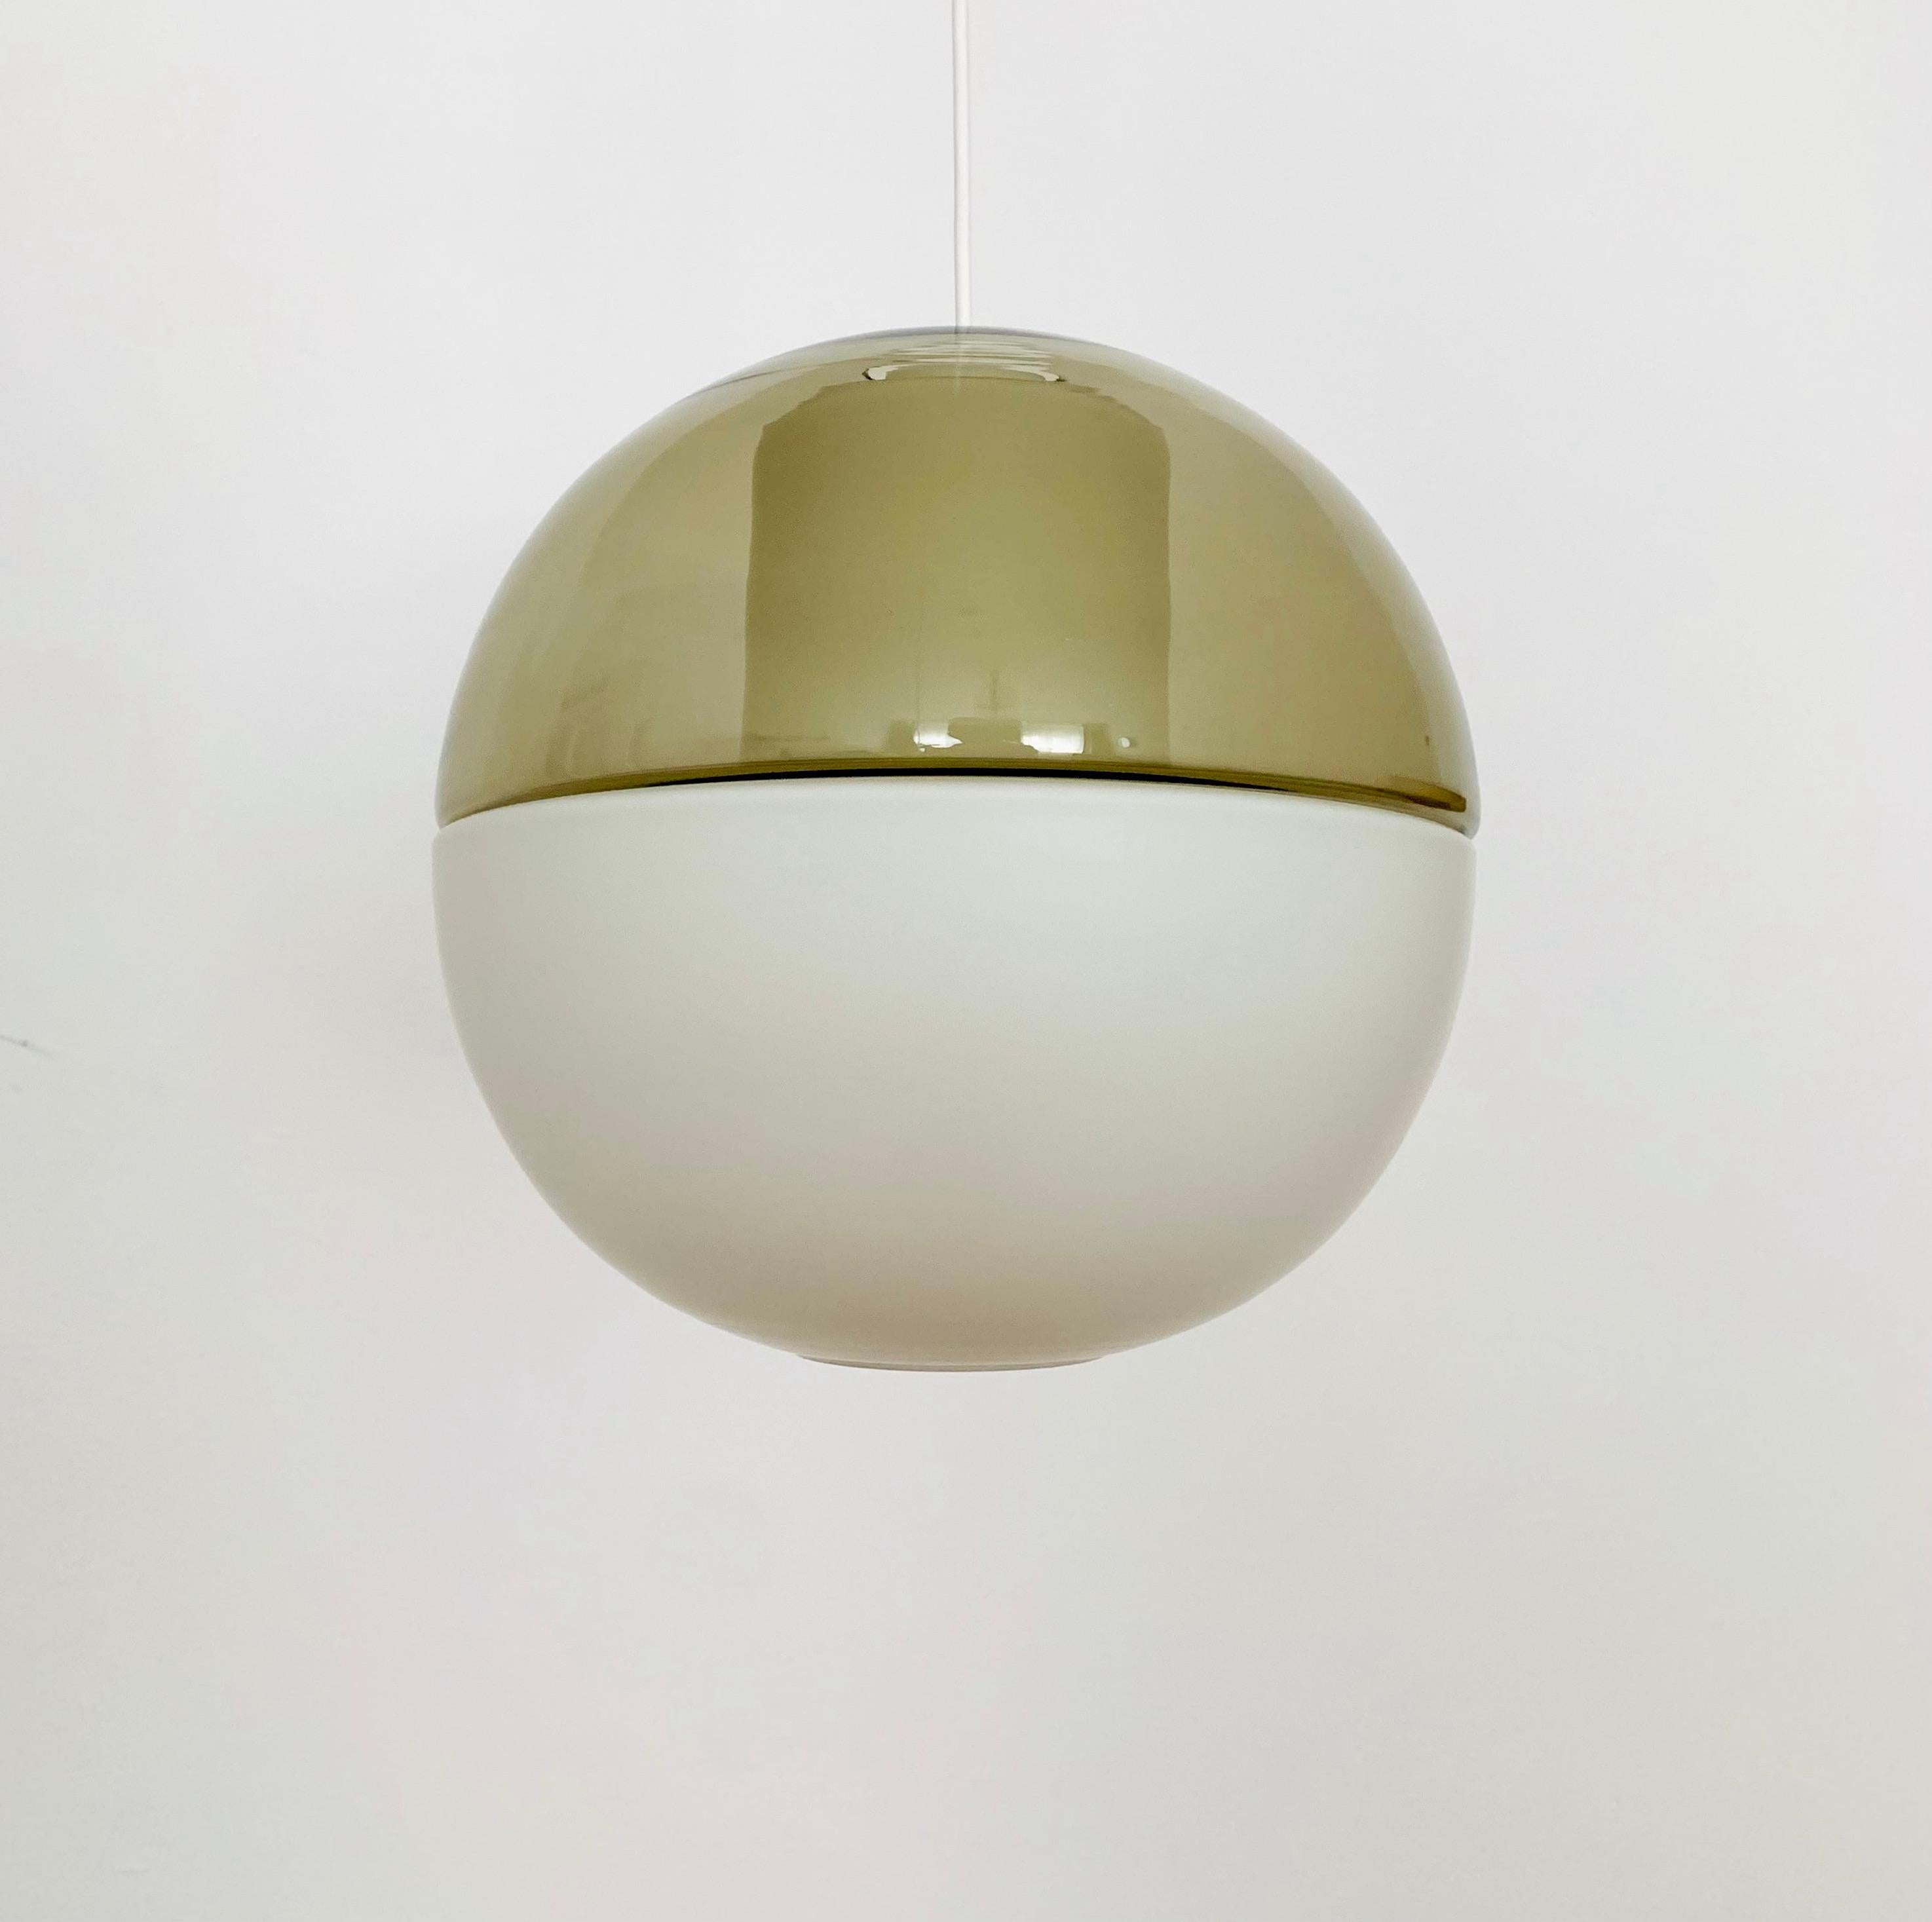 Wonderful glass pendant lamp from the 1950s.
Very nice design with a stylish look.
The 2 glass bodies create a special lighting atmosphere.
Very rare in this version!
A real collector's item and an asset to any home.

Manufacturer: Peill and